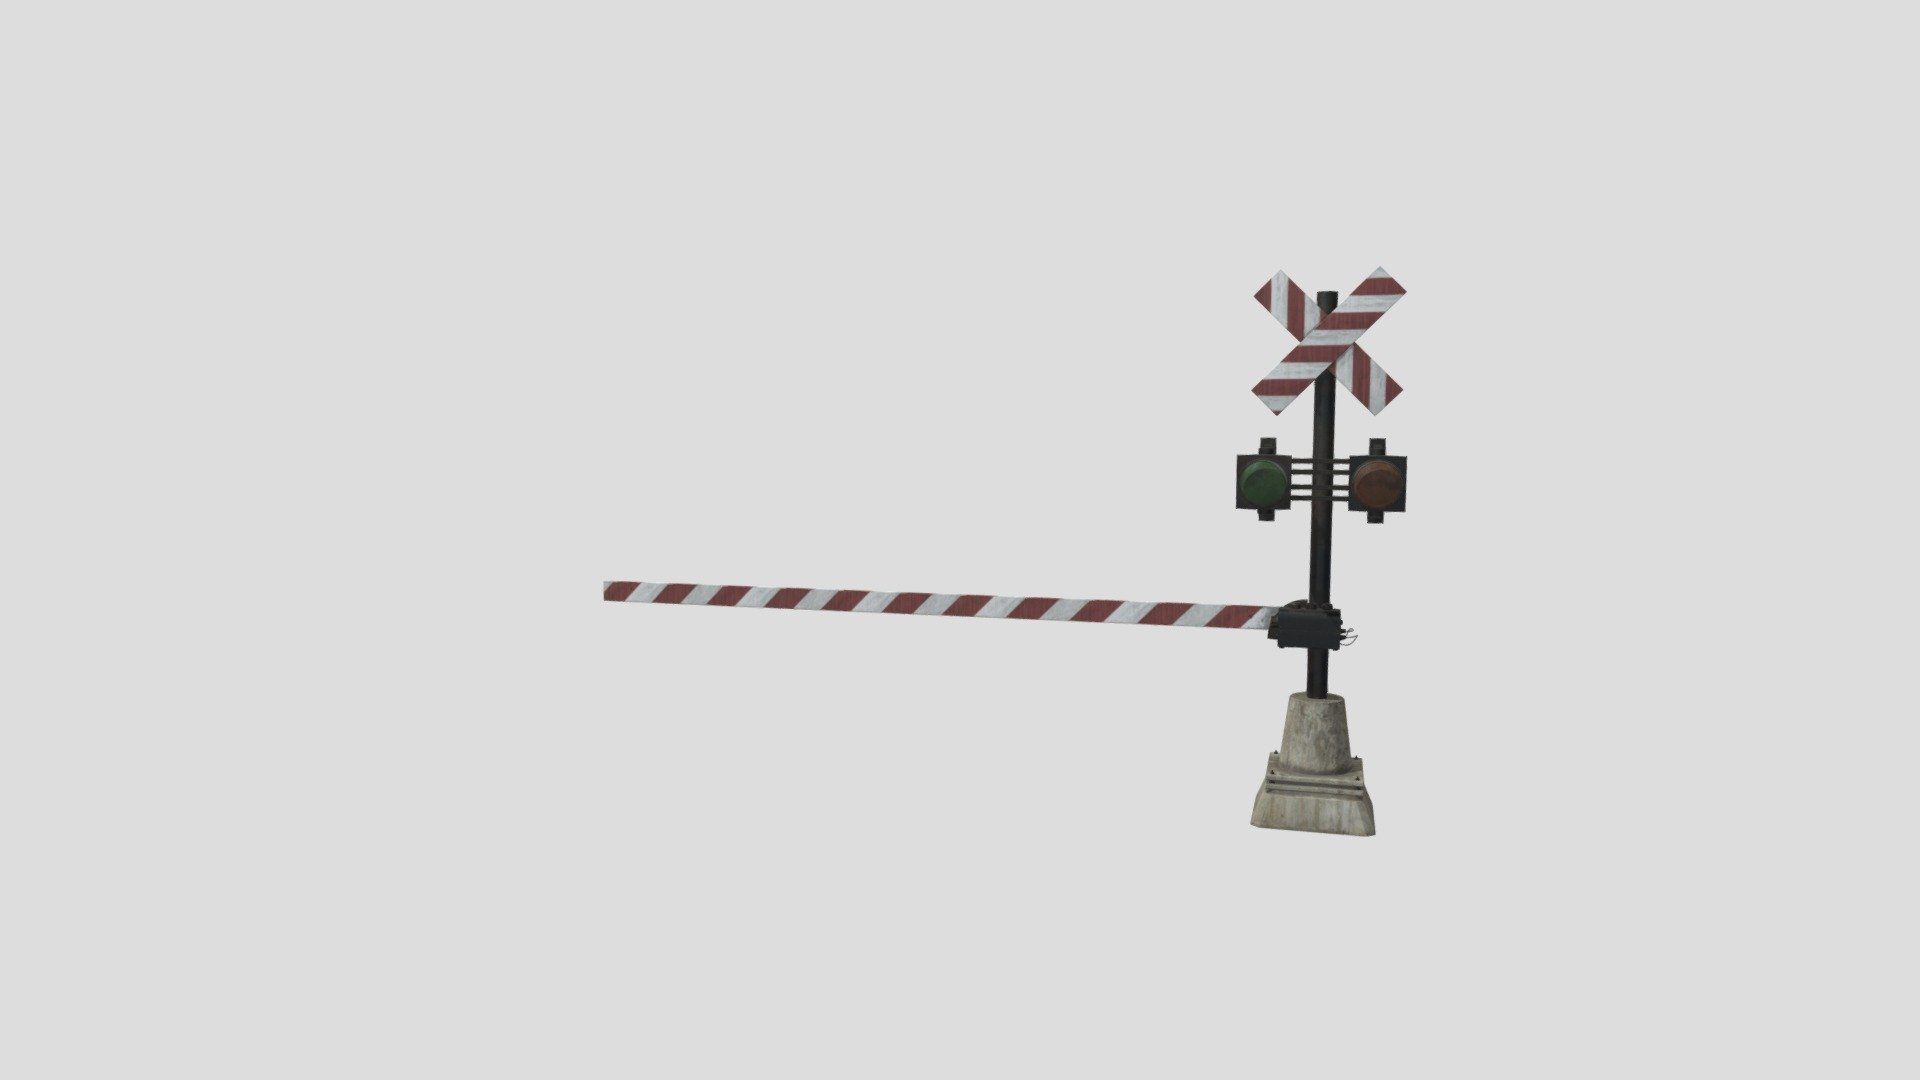 Highly detailed 3d model of railway barrier with all textures, shaders and materials. This 3d model is ready to use, just put it into your scene 3d model